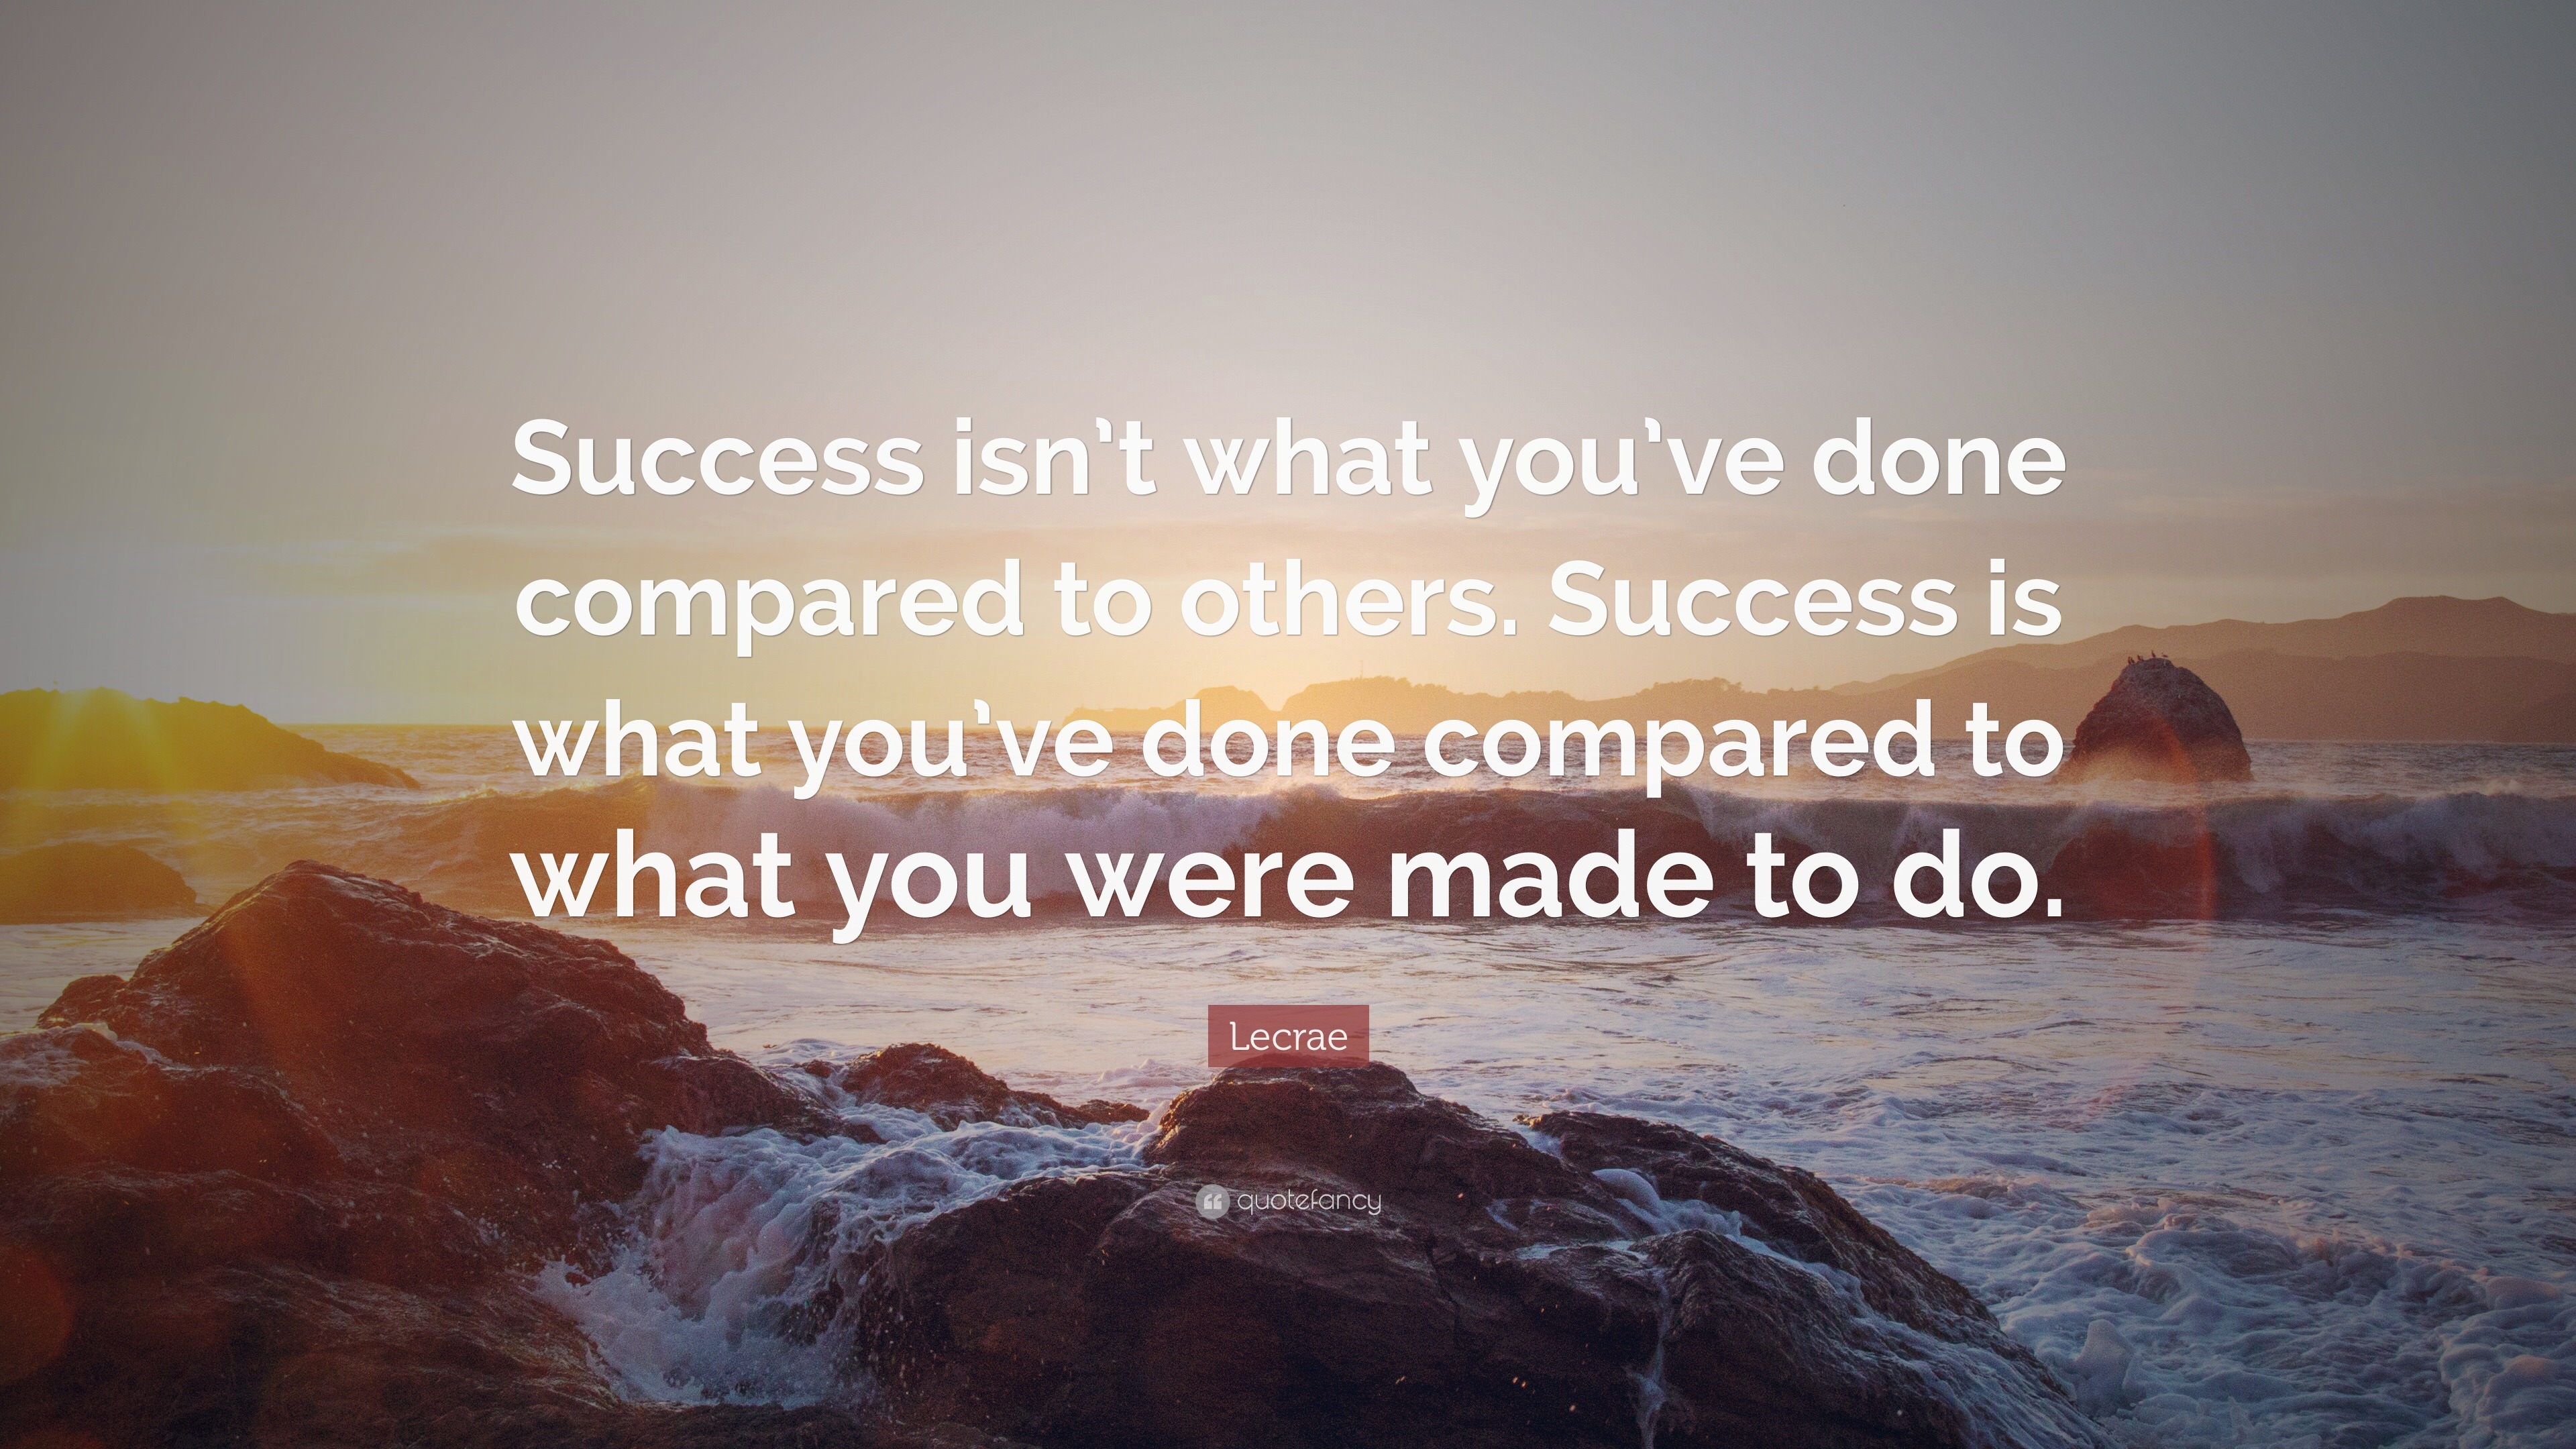 Lecrae Quote: “Success isn’t what you’ve done compared to others ...